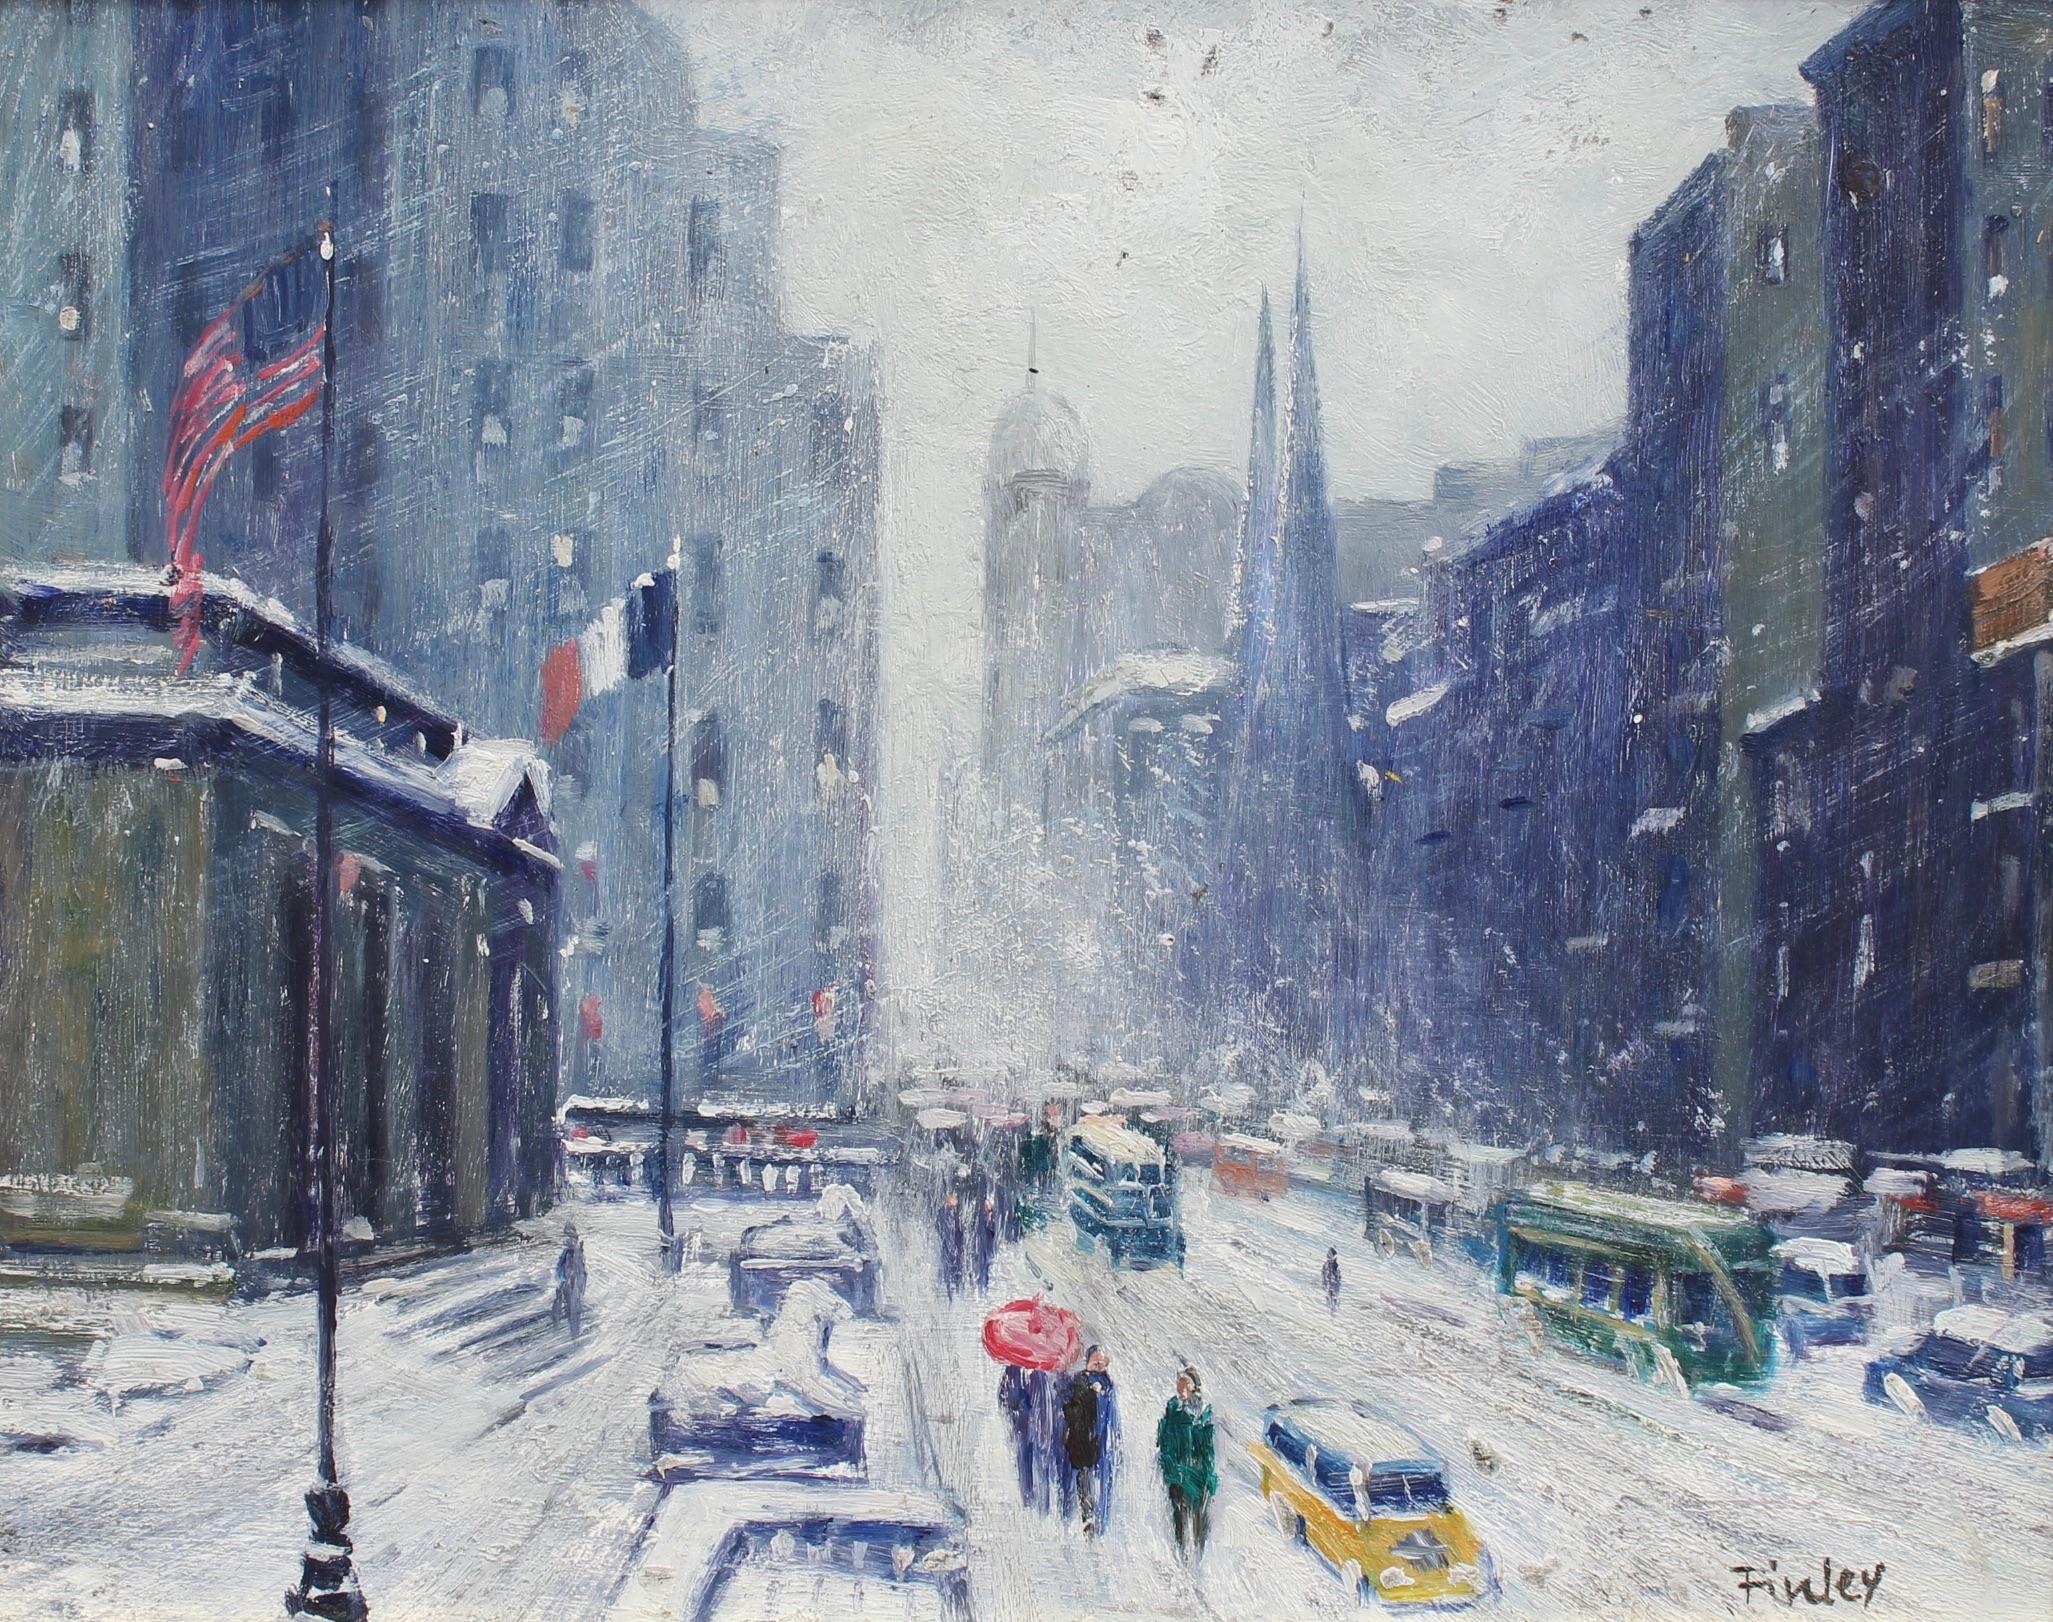 (After) Guy Carleton Wiggins Figurative Painting - 'New York Public Library Under Snow 1940s' by Finley